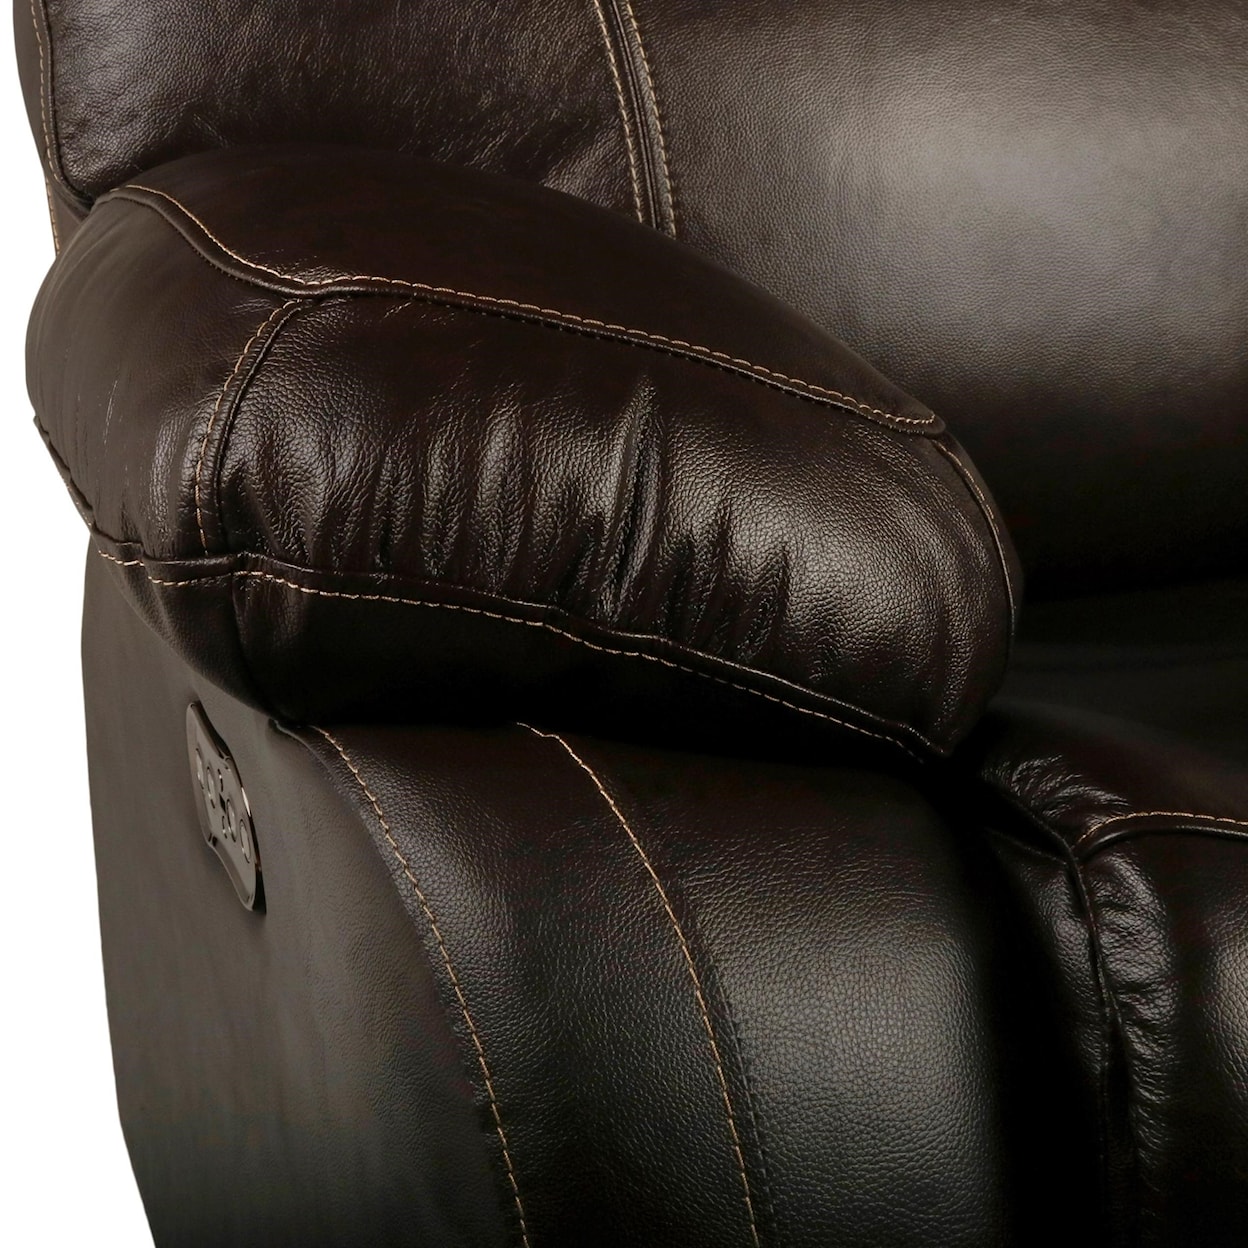 New Classic Dante Leather Power Recliner with Power Headrest